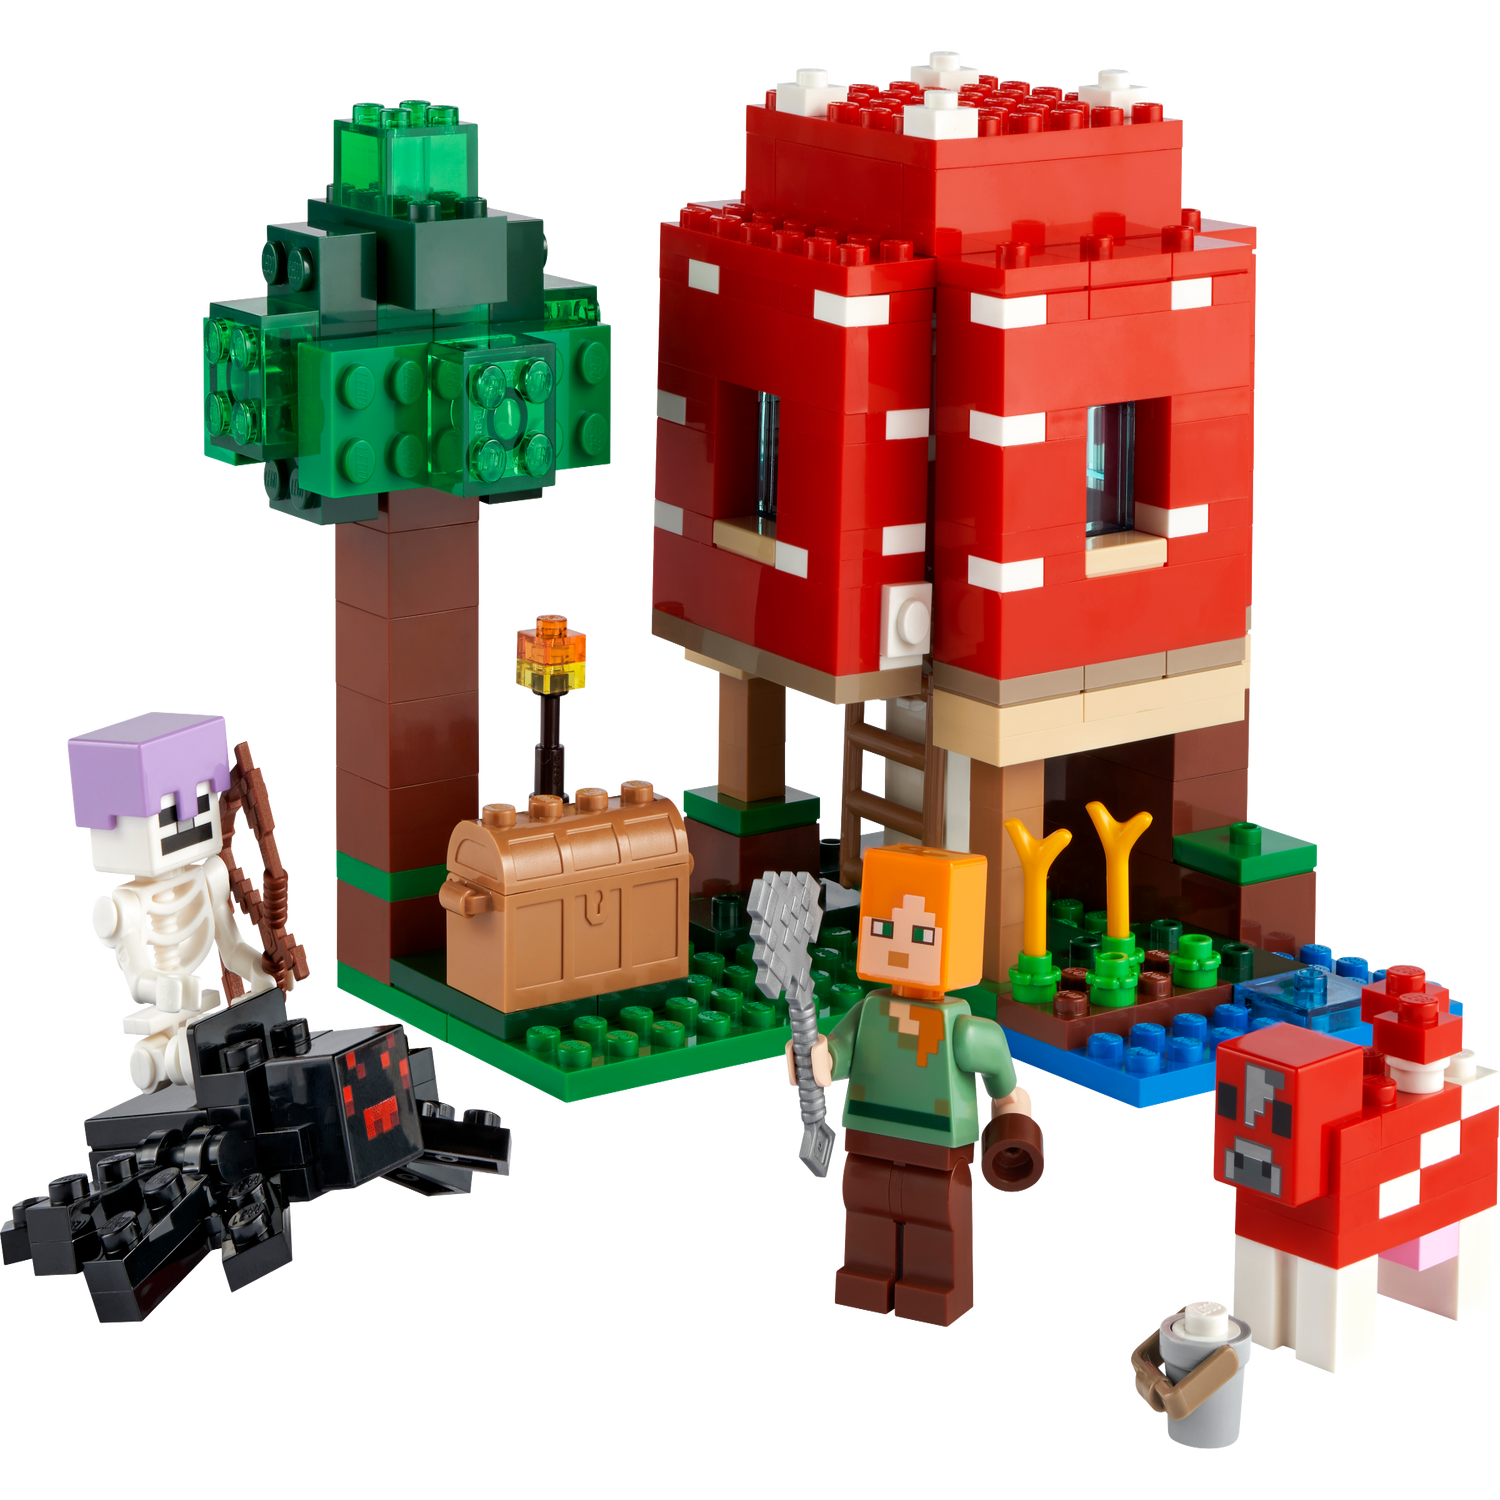 The Mushroom House 21179 | Minecraft® | Buy online at the Official LEGO® Shop